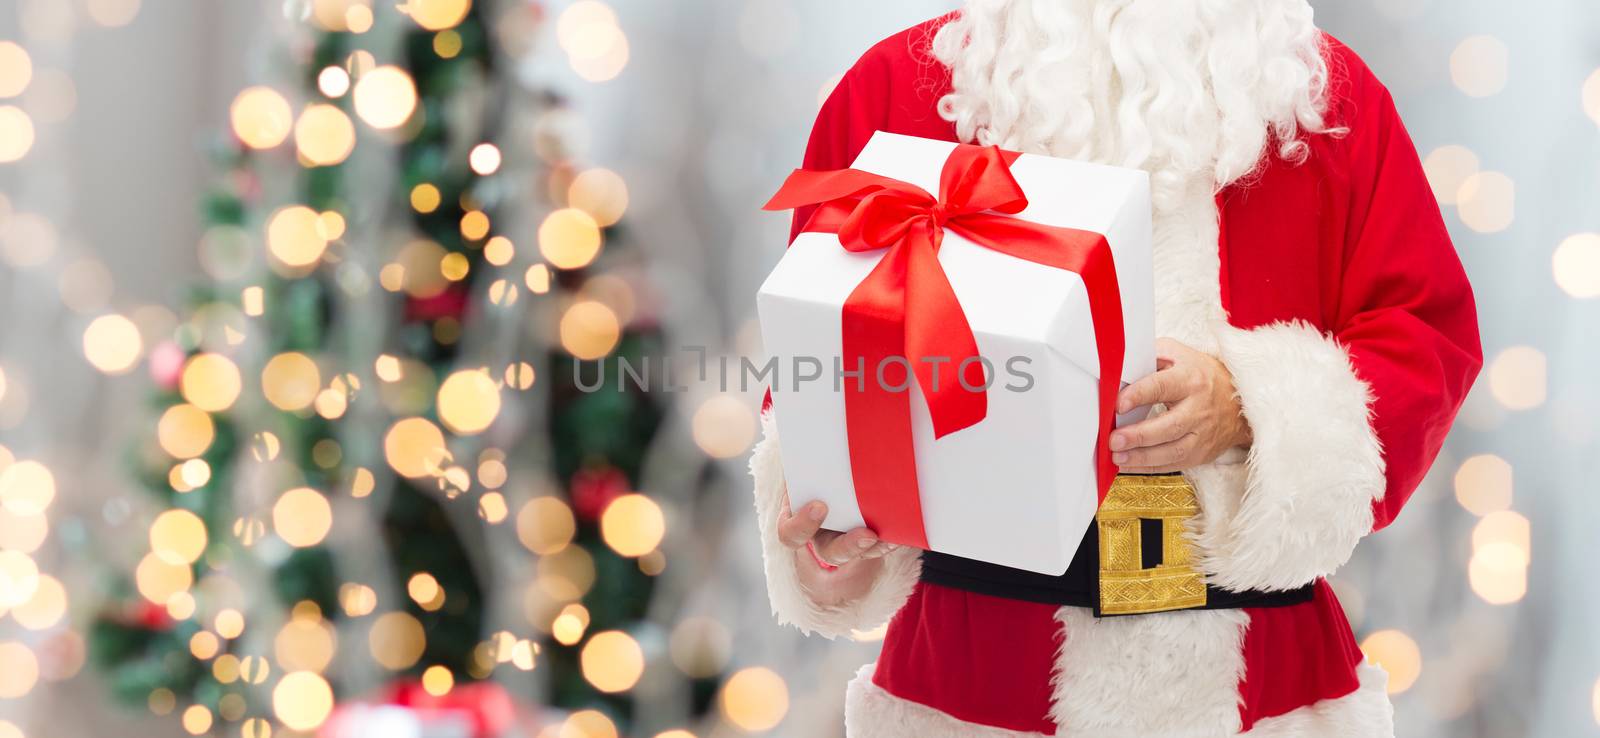 christmas, holidays and people concept - close up of santa claus with gift box over tree lights background